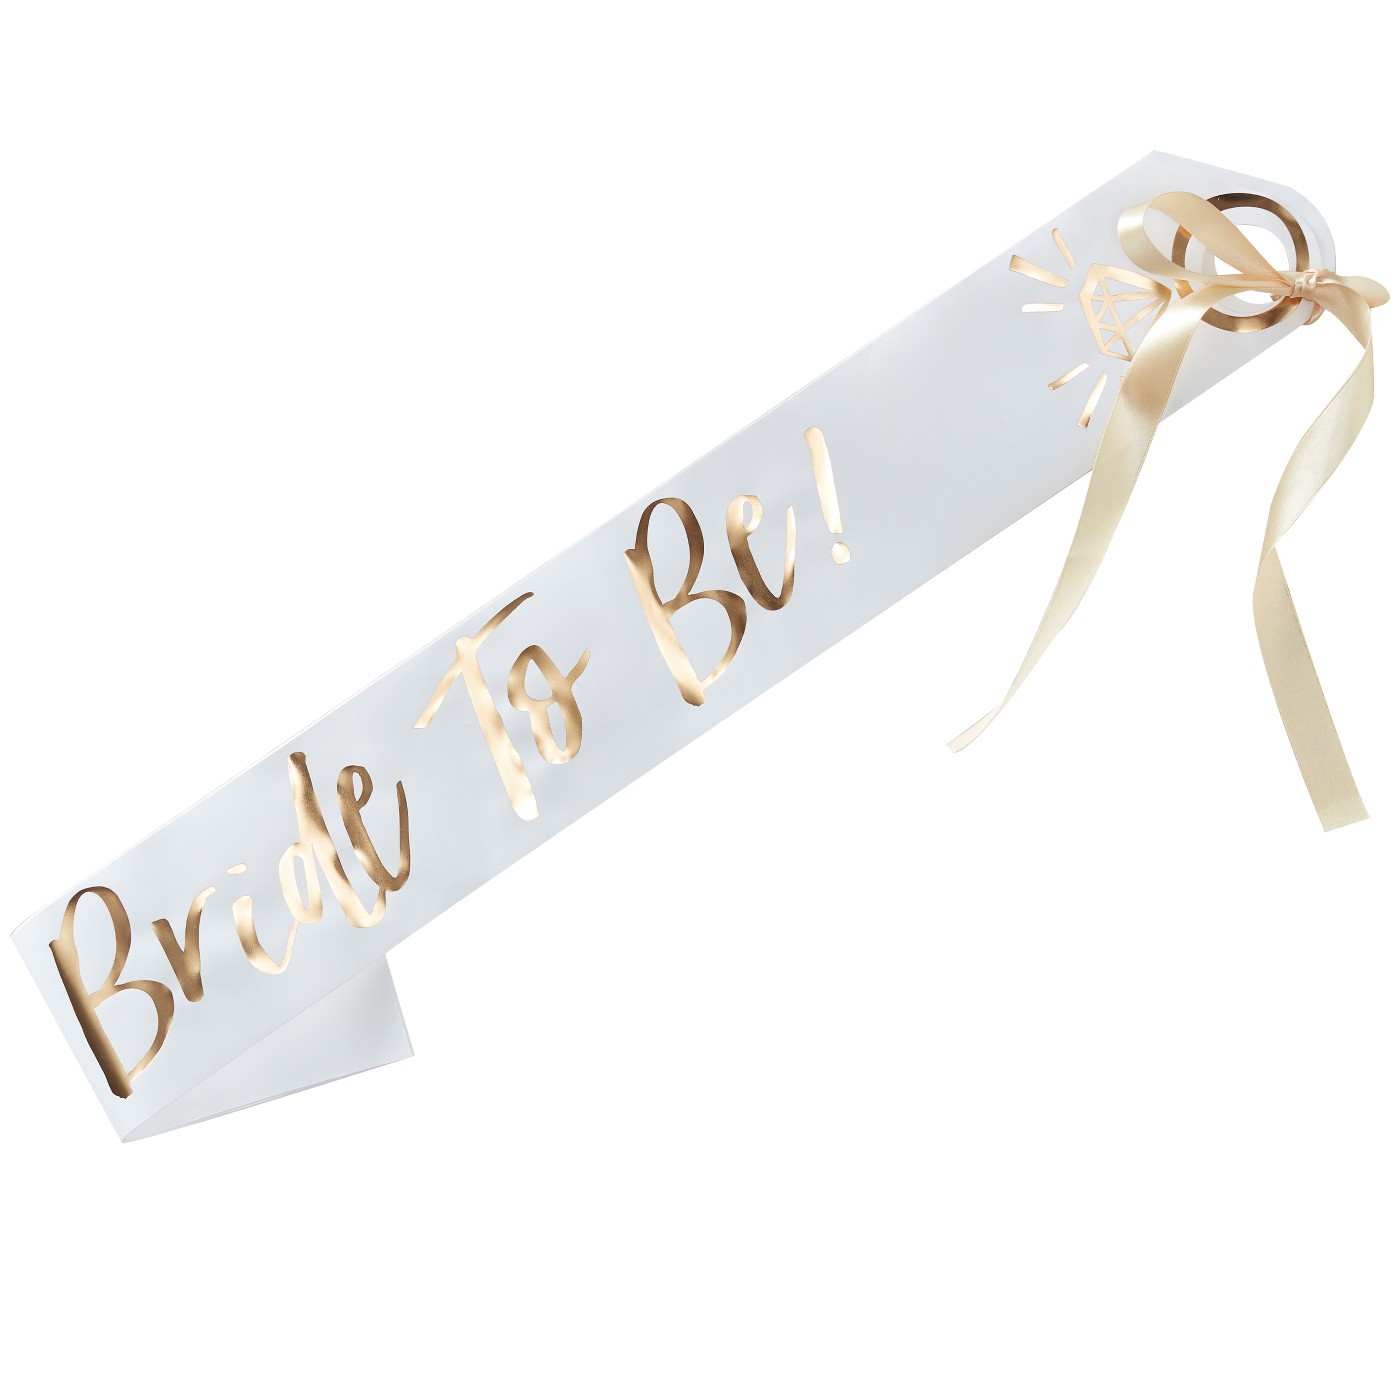 Ginger Ray White And Gold Foiled Bride To Be Sash I Do Crew - image 2 of 2